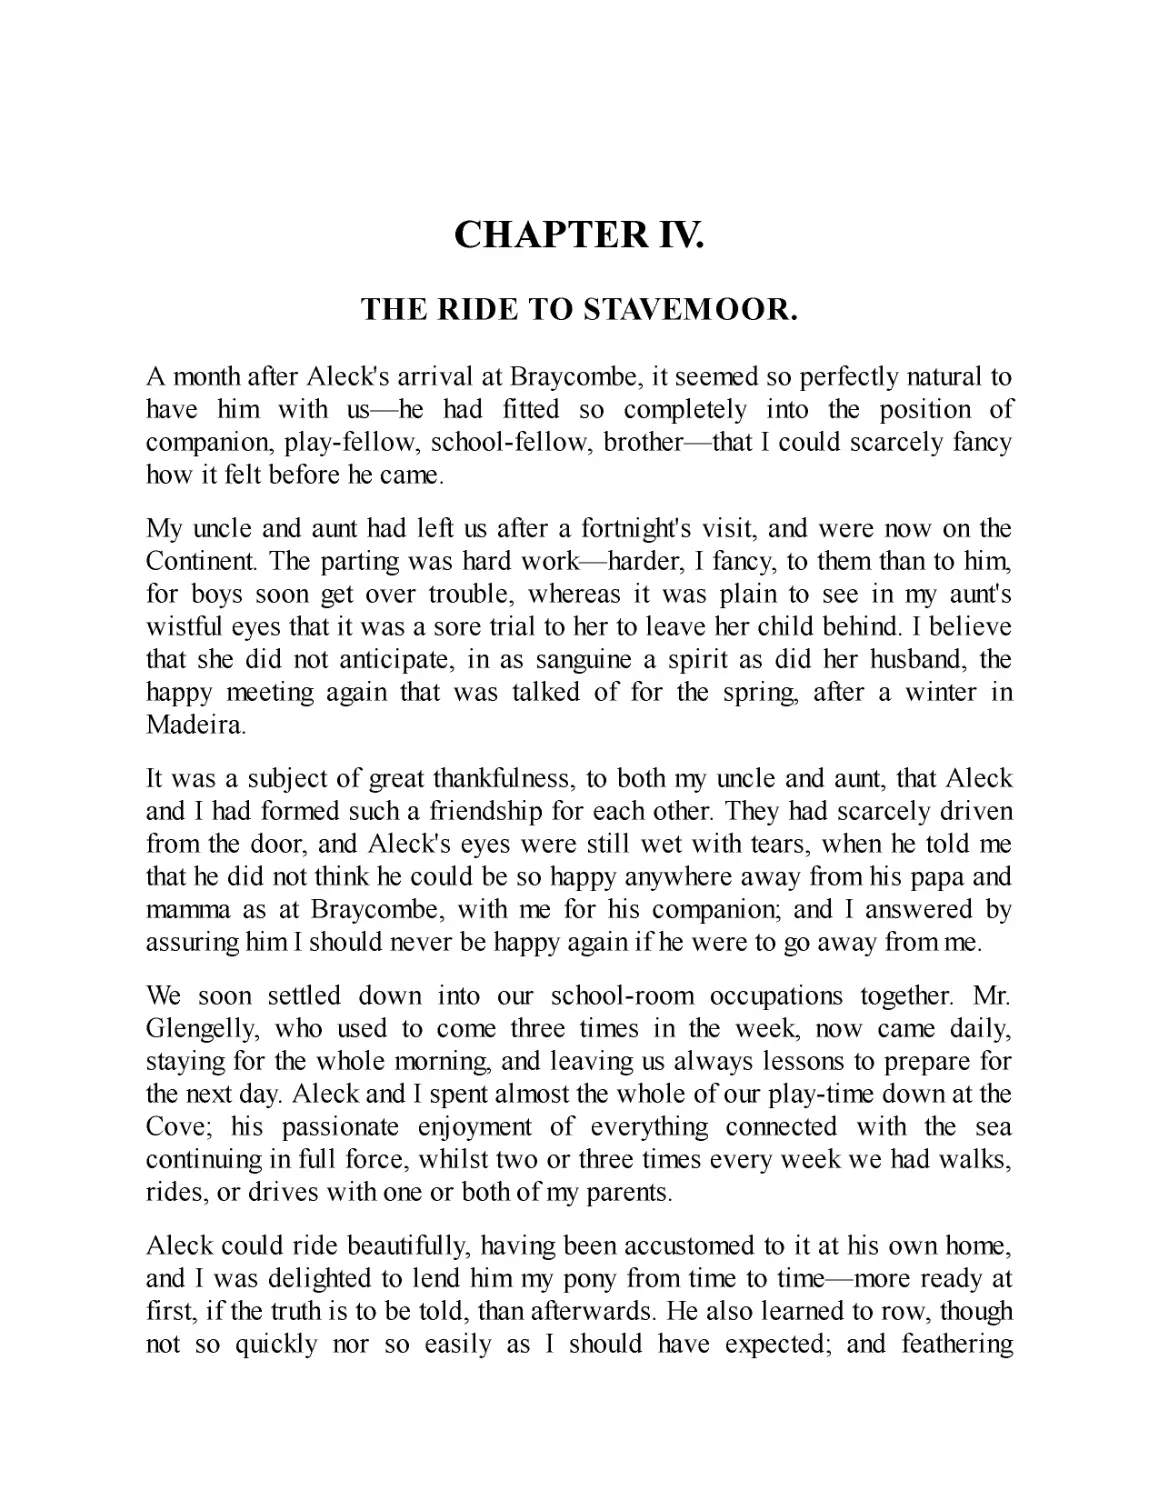 ﻿CHAPTER IV